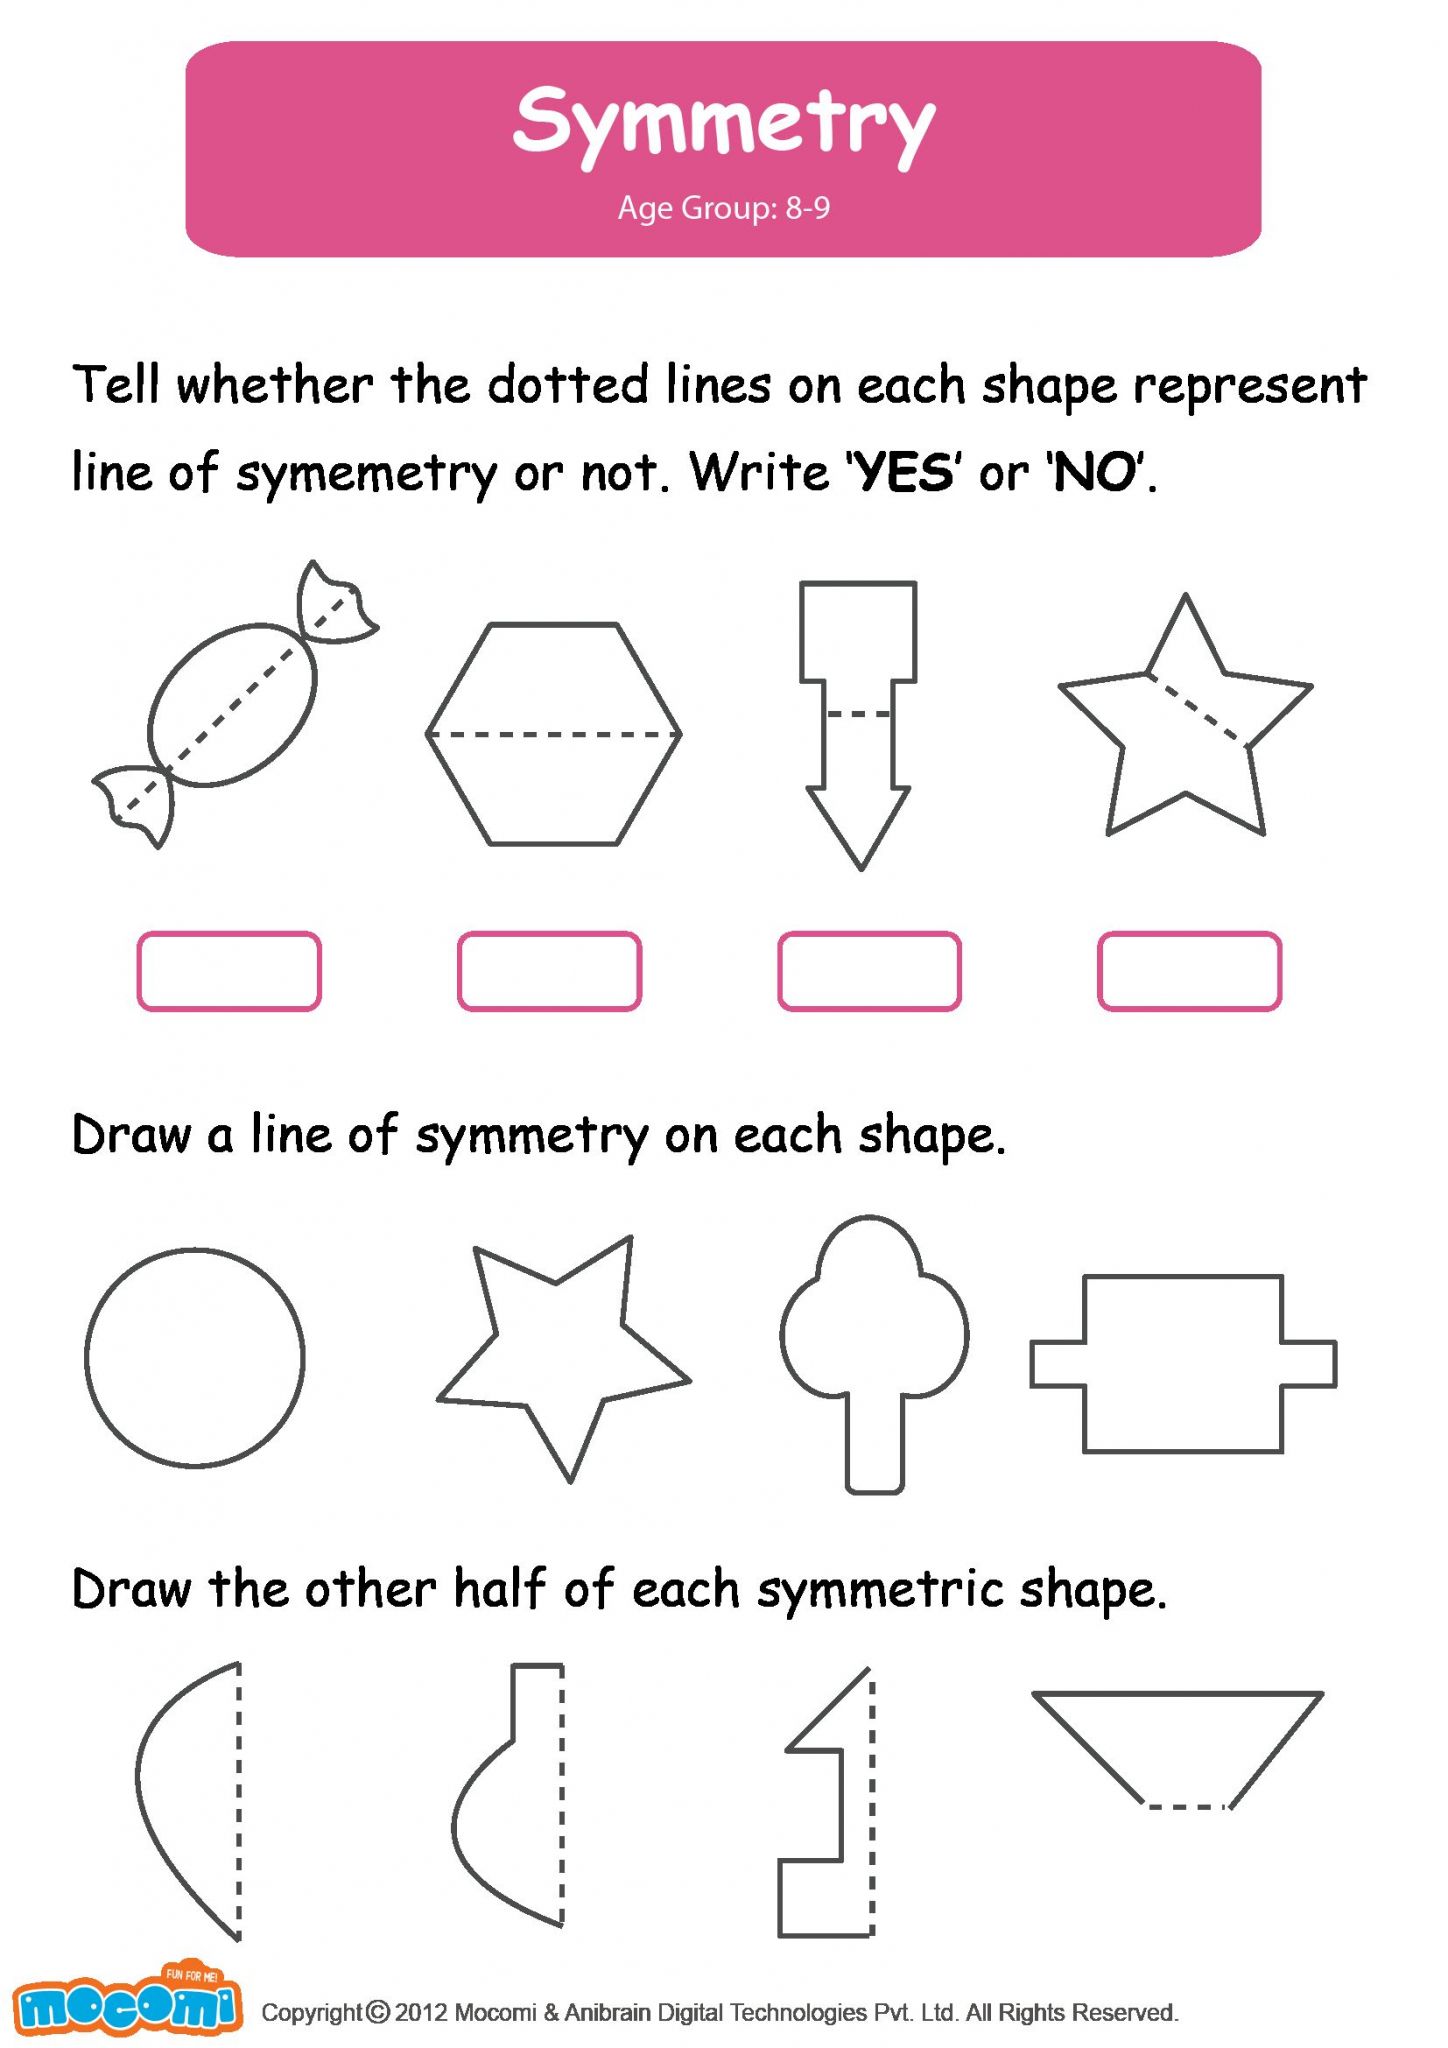 Symmetry Math Worksheet for Kids For more interesting maths worksheets and activities for kids